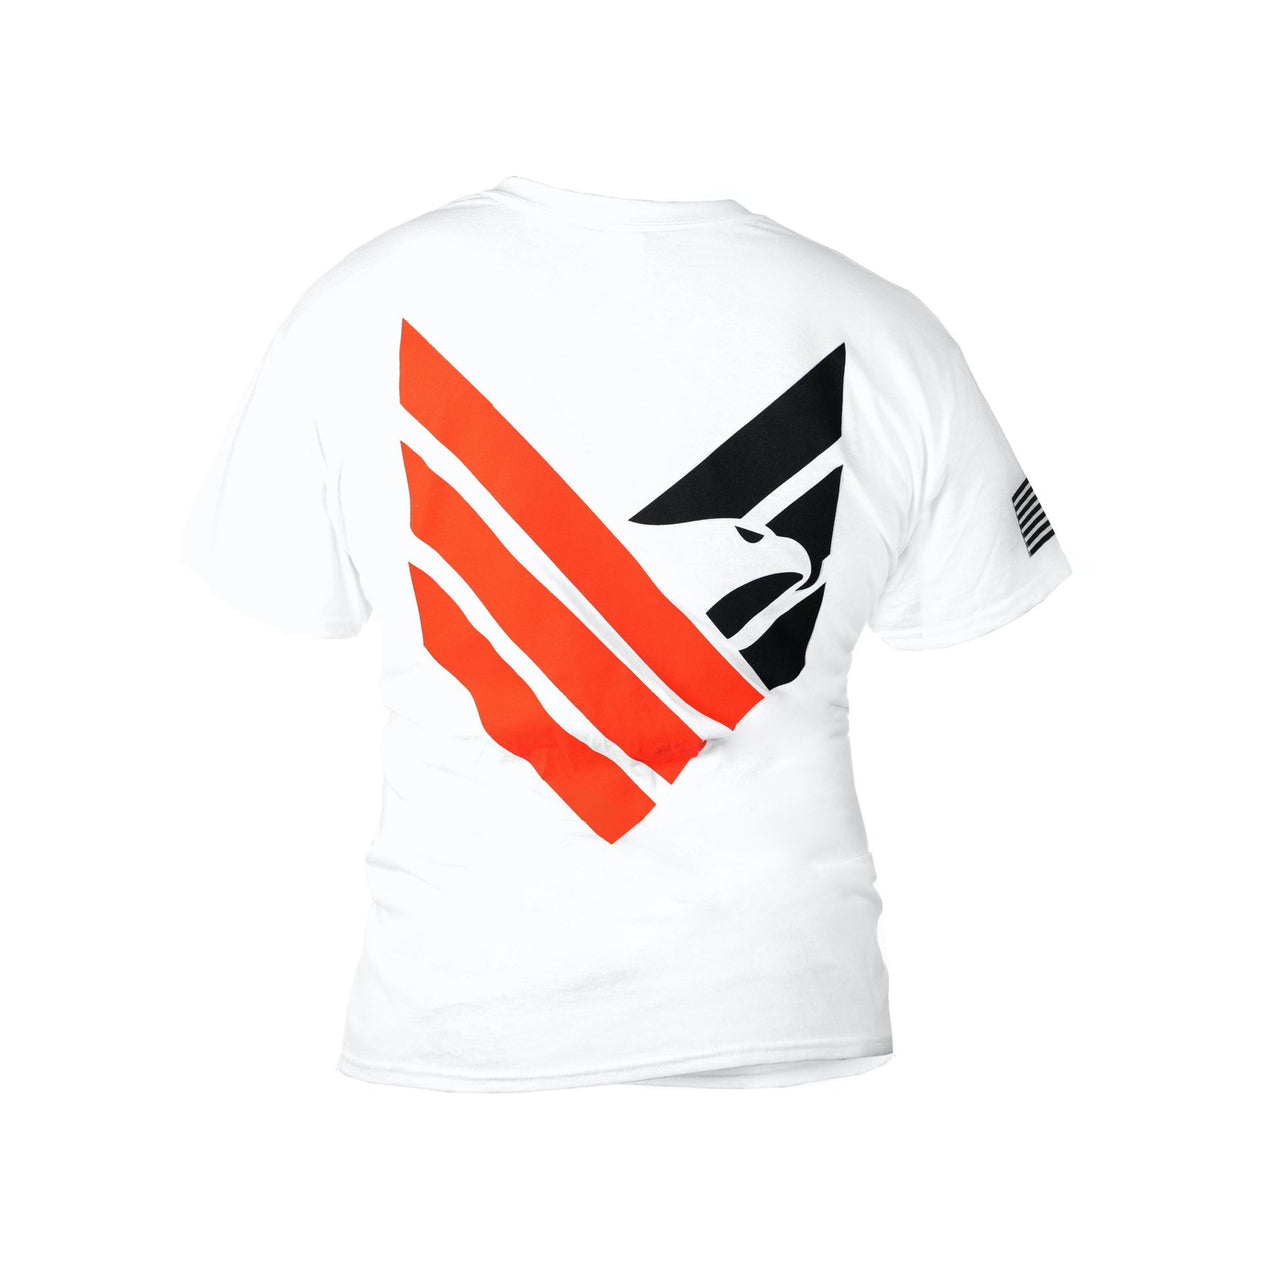 Body Armor Direct t-shirt featuring a bold geometric design in black and red with a stylized bird motif representing Body Armor Direct, including a small American flag on the sleeve.